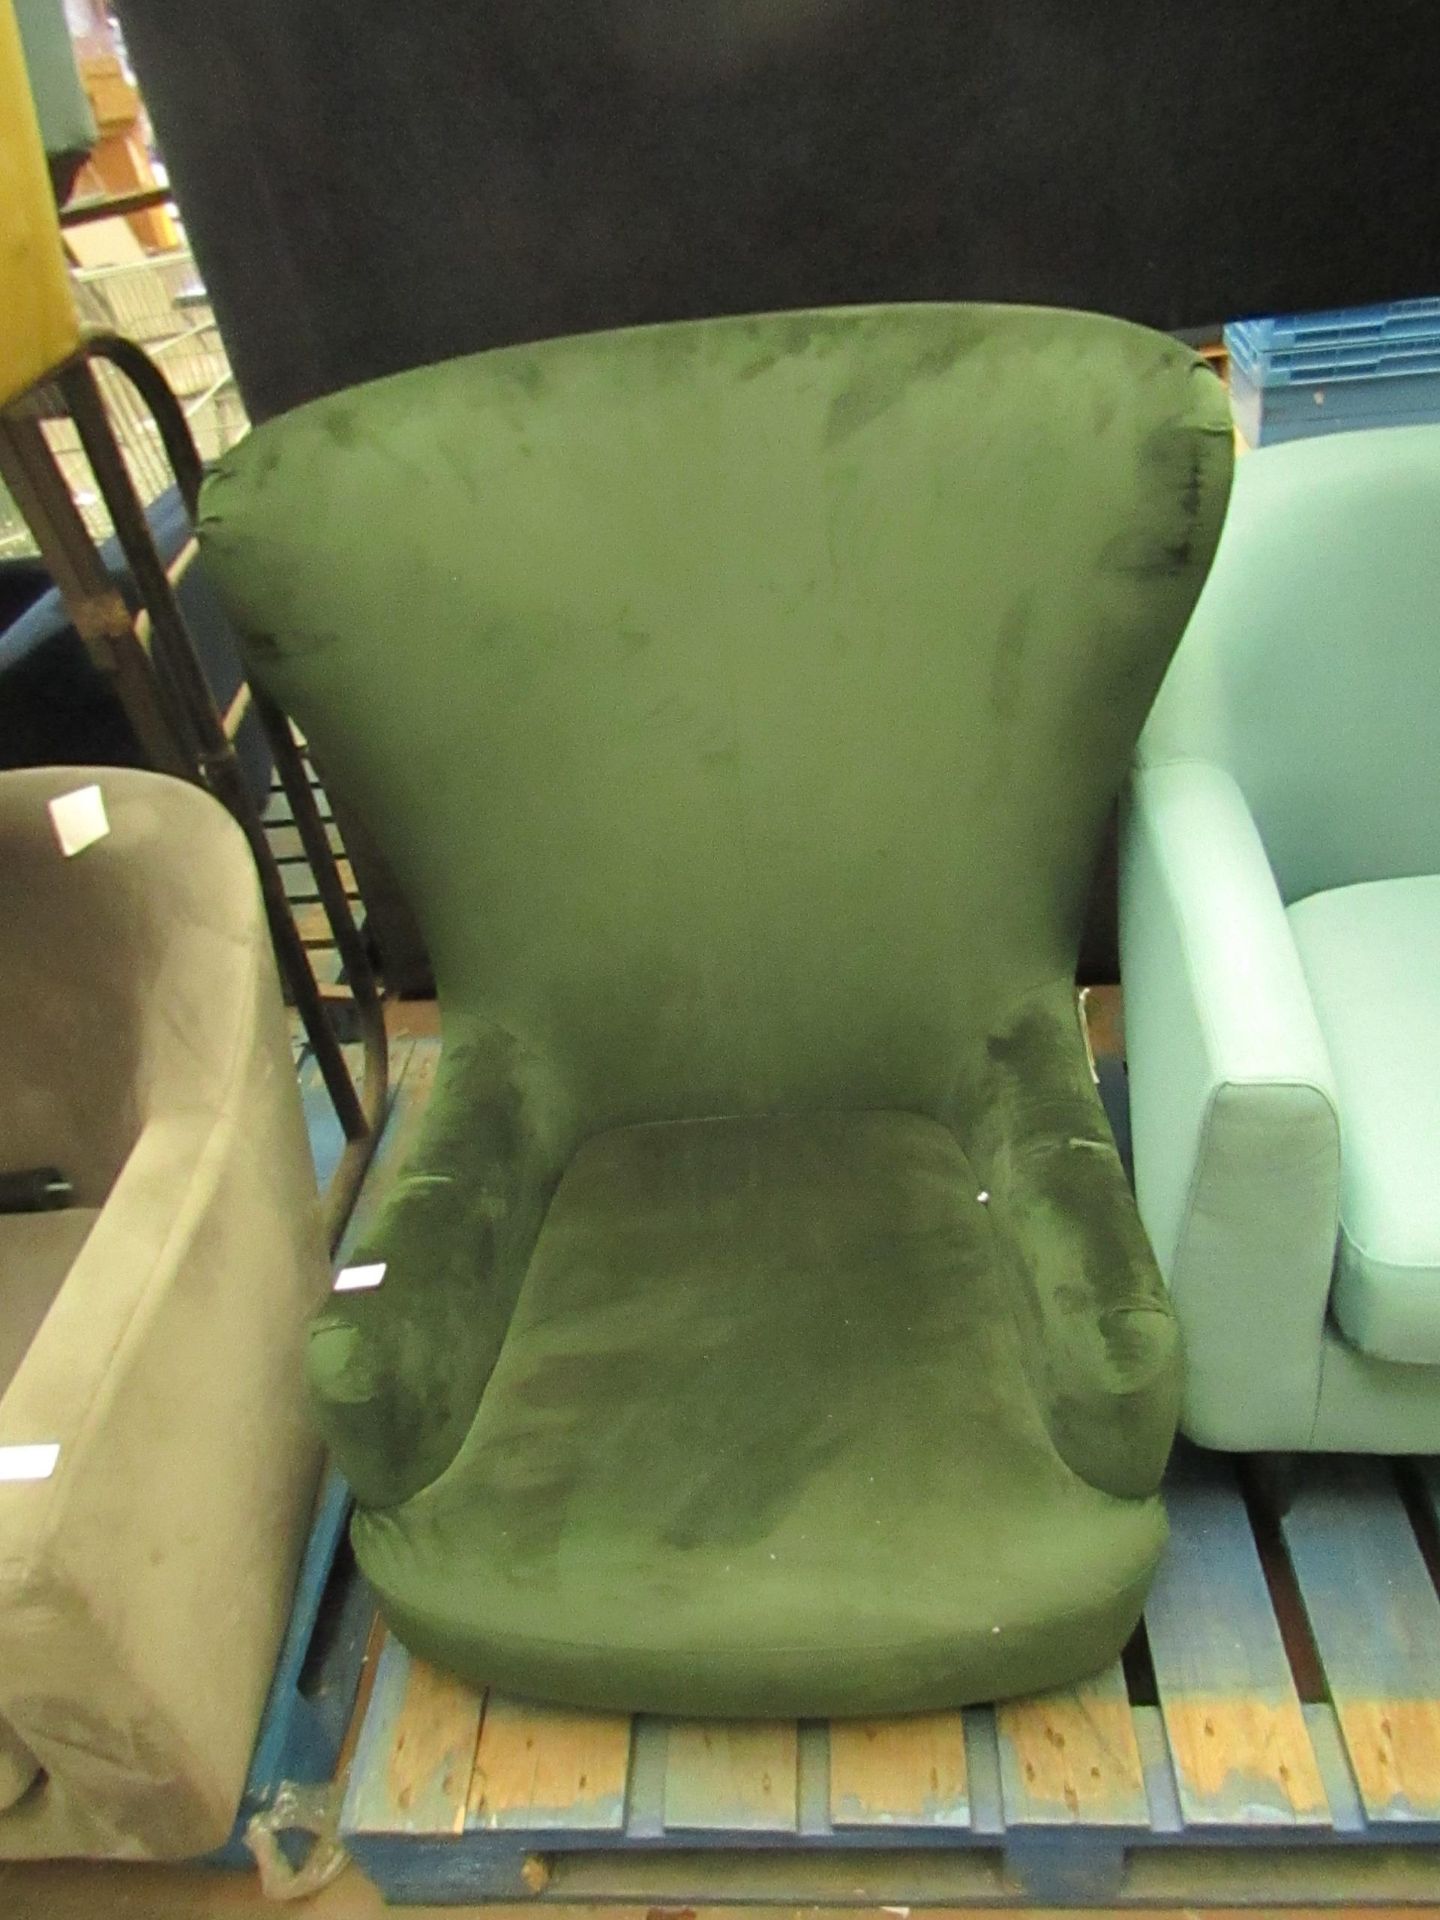 | 1X | MADE.COM HIGH BACK GREEN ARMCHAIR | NO VISIBLE DAMAGE BUT MISSING LEGS | RRP ?- |